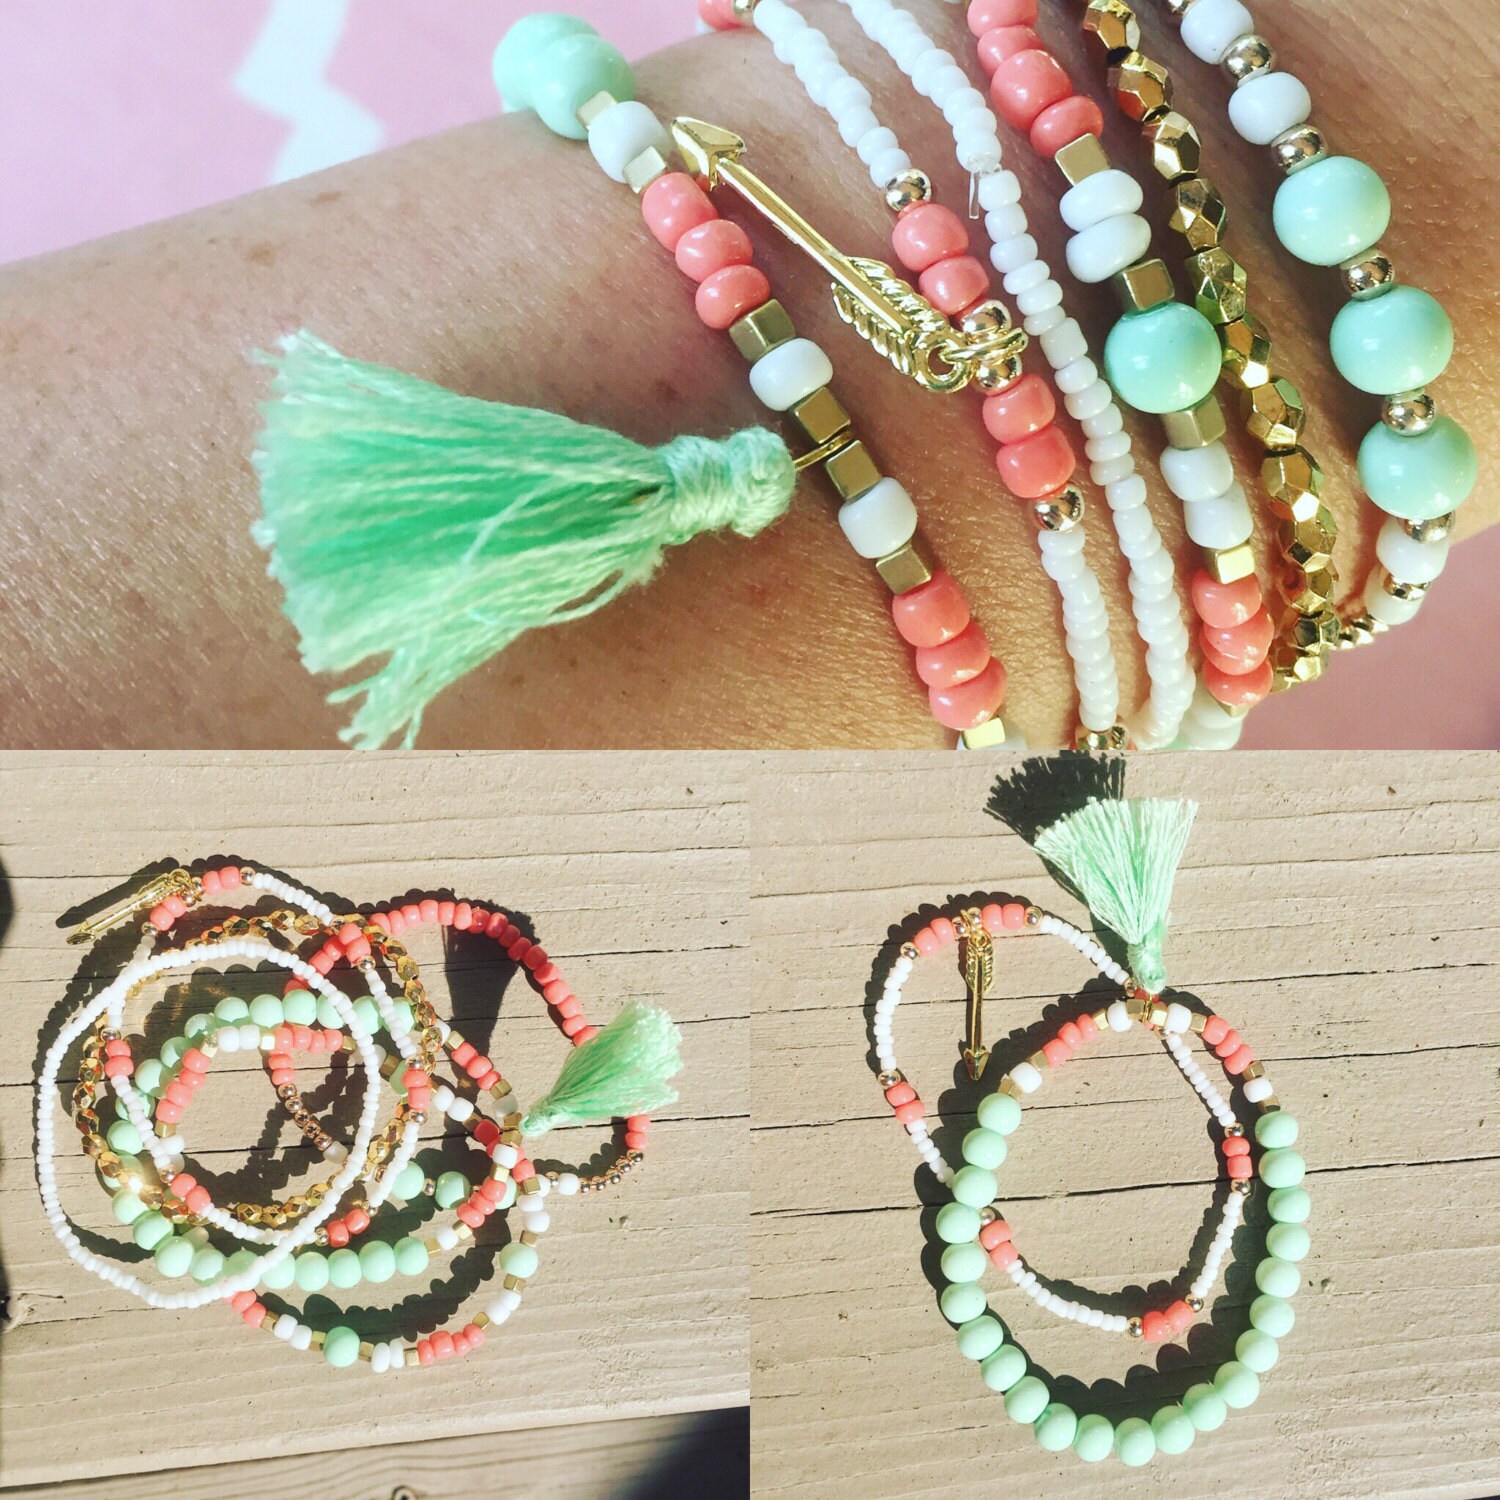 Mint and Coral Bracelets by BrittanyAnndesigns on Etsy